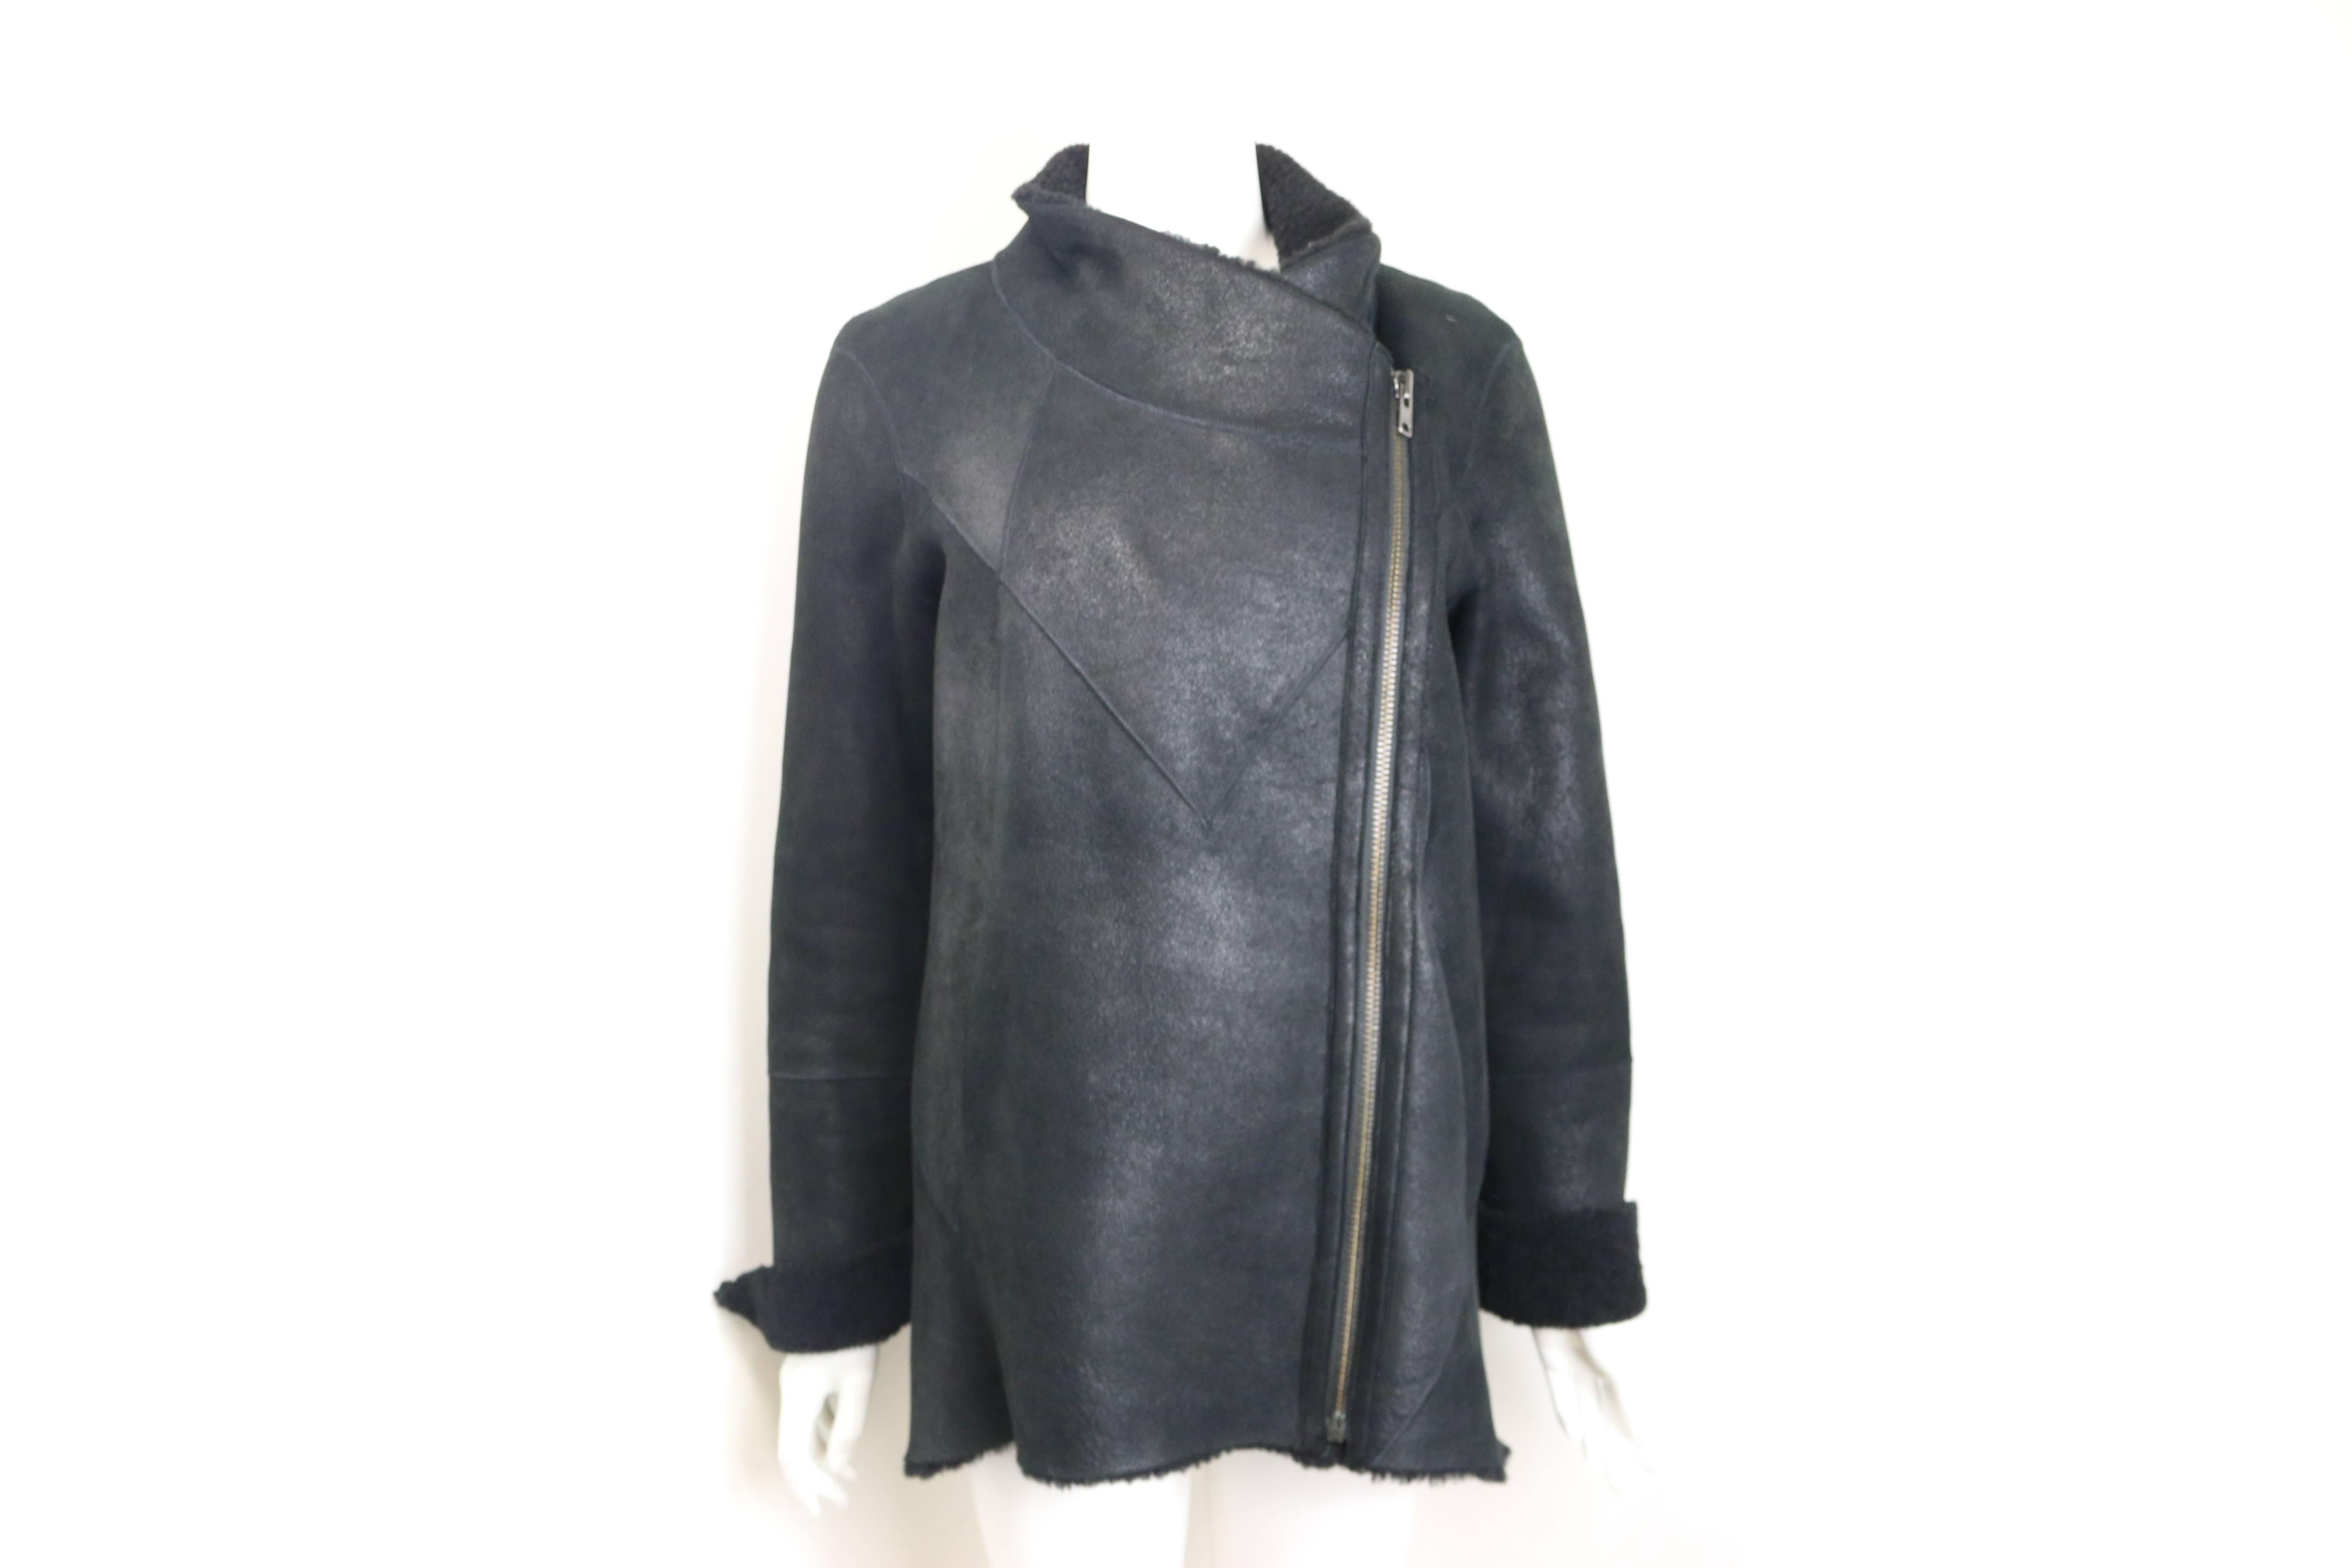 - Helmut Lang black lambskin leather wrecked shearling jacket. 

- Angled Seaming in front and back. 

- Funnel neck unzips to turn-back collar with off-center zip front closure. 

- Zip closure cuffs.  

- Side pockets. 

- Fur origin: Spain. 

-